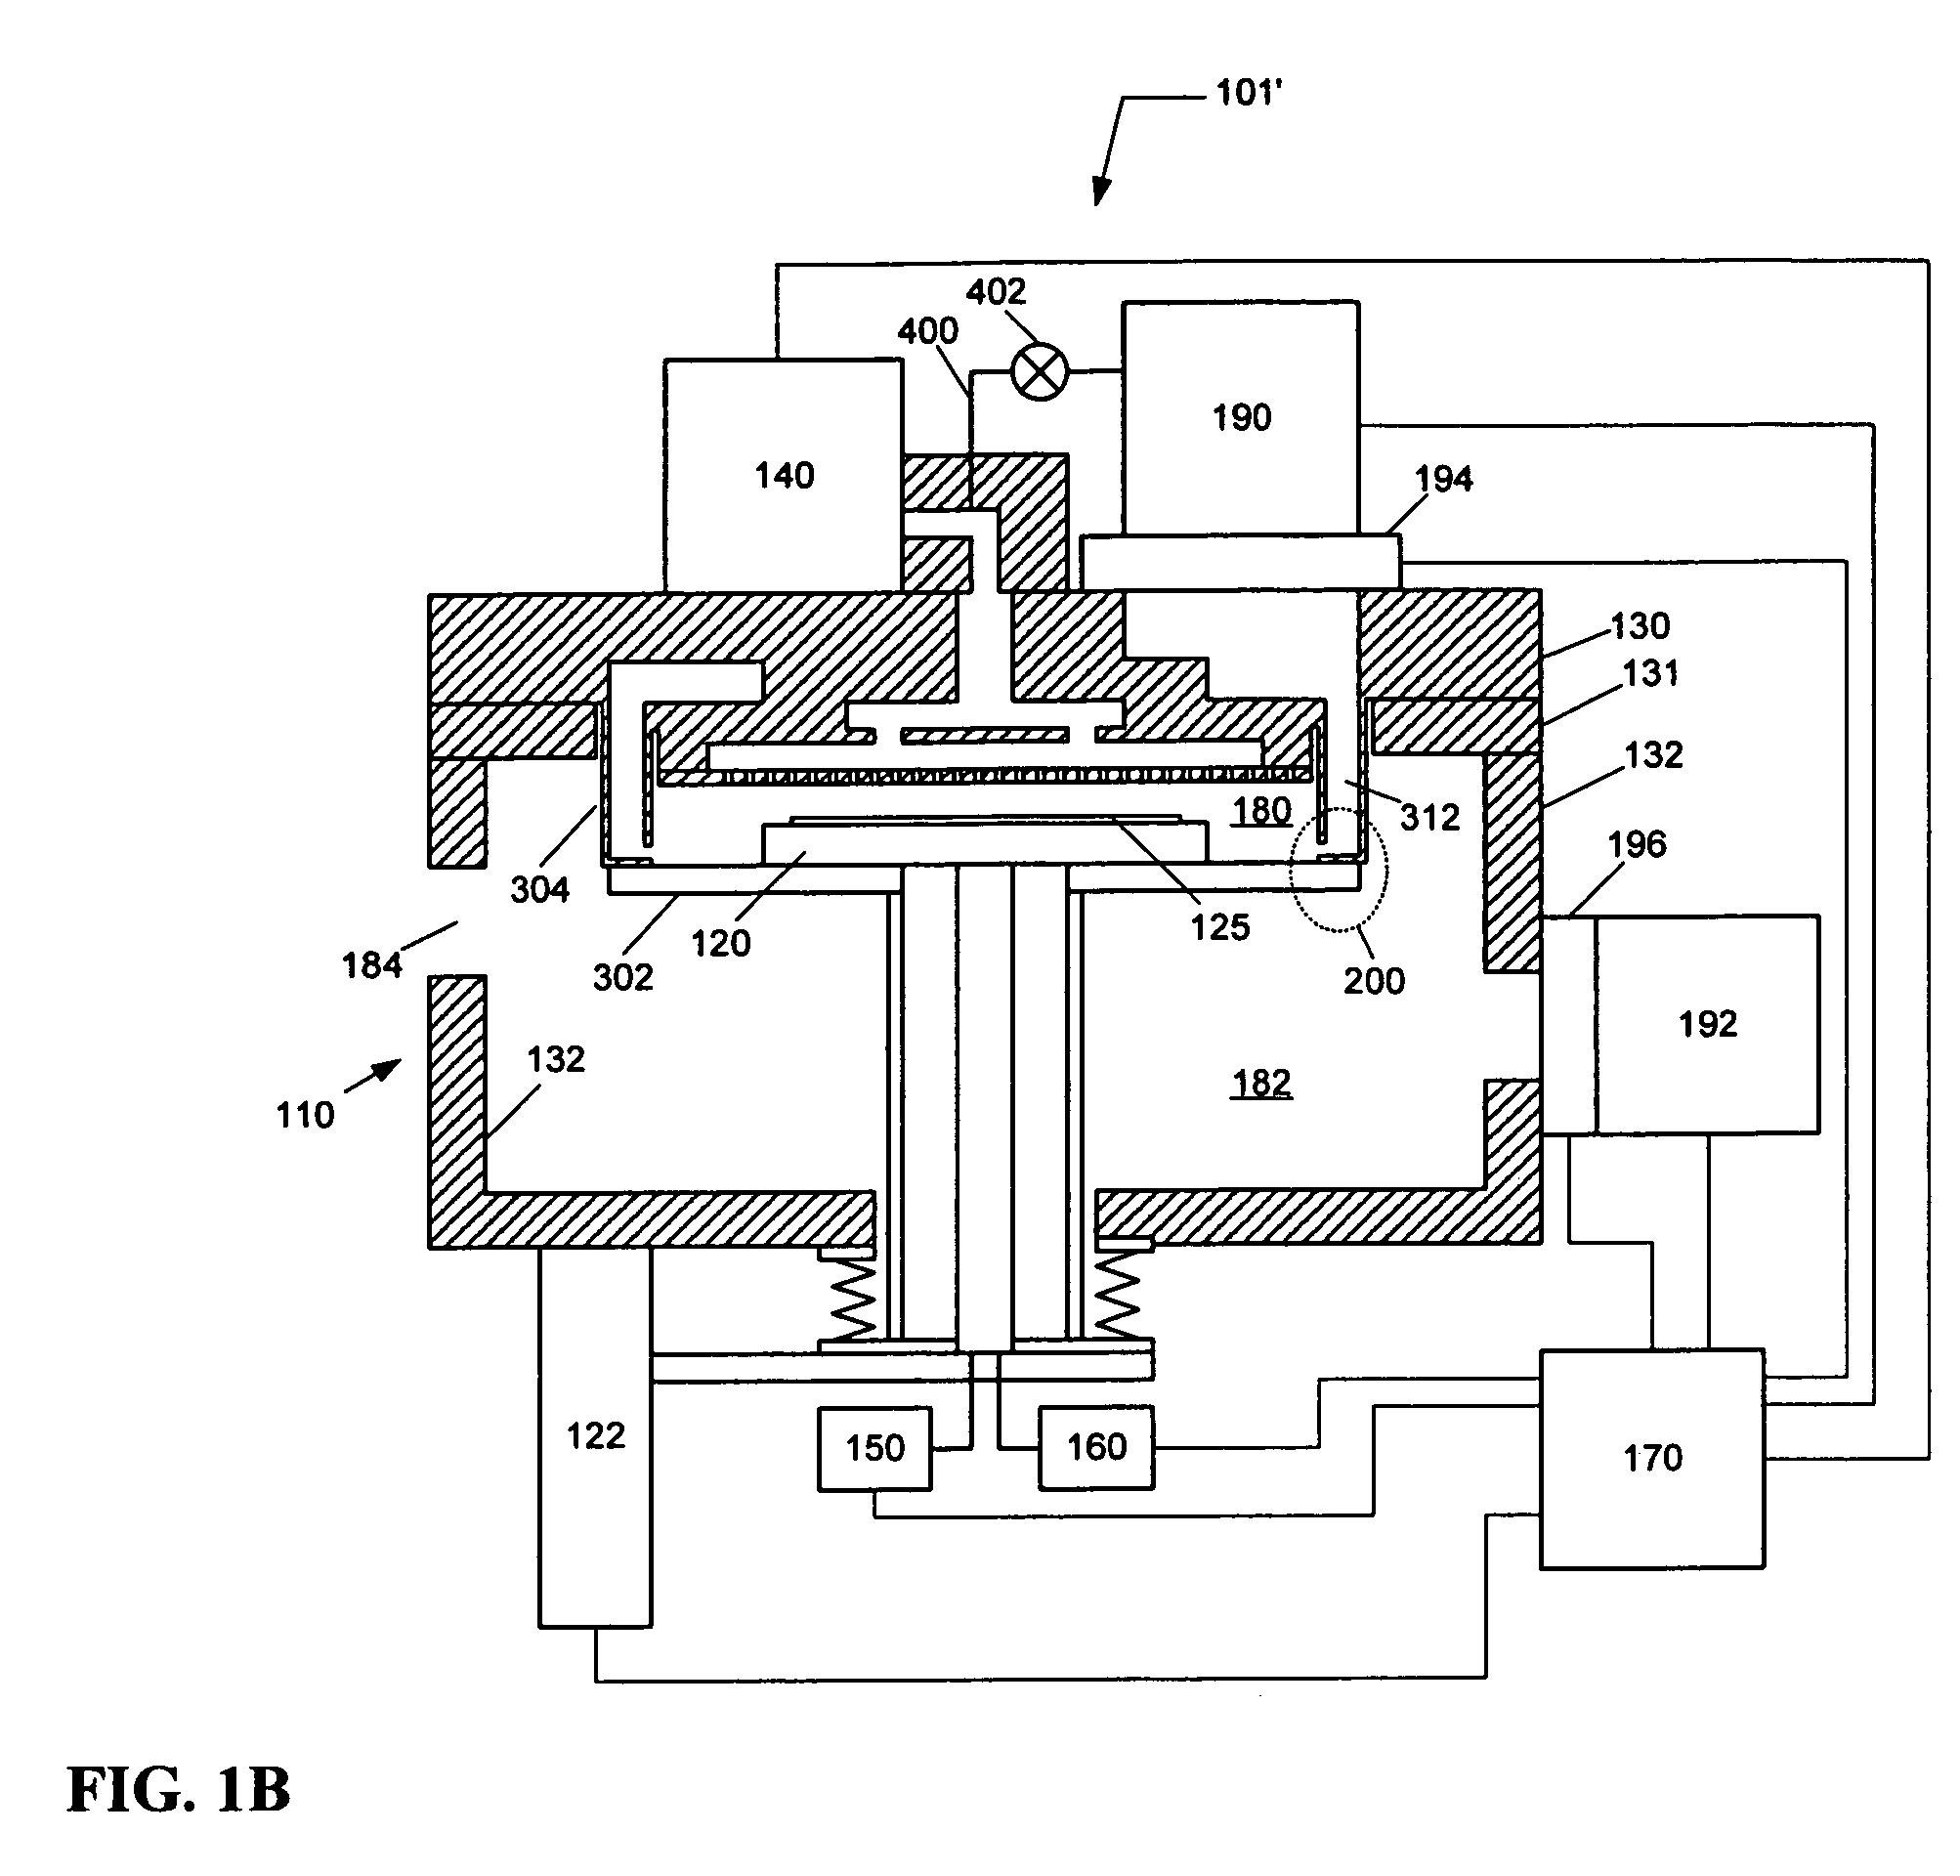 Exhaust system for a vacuum processing system